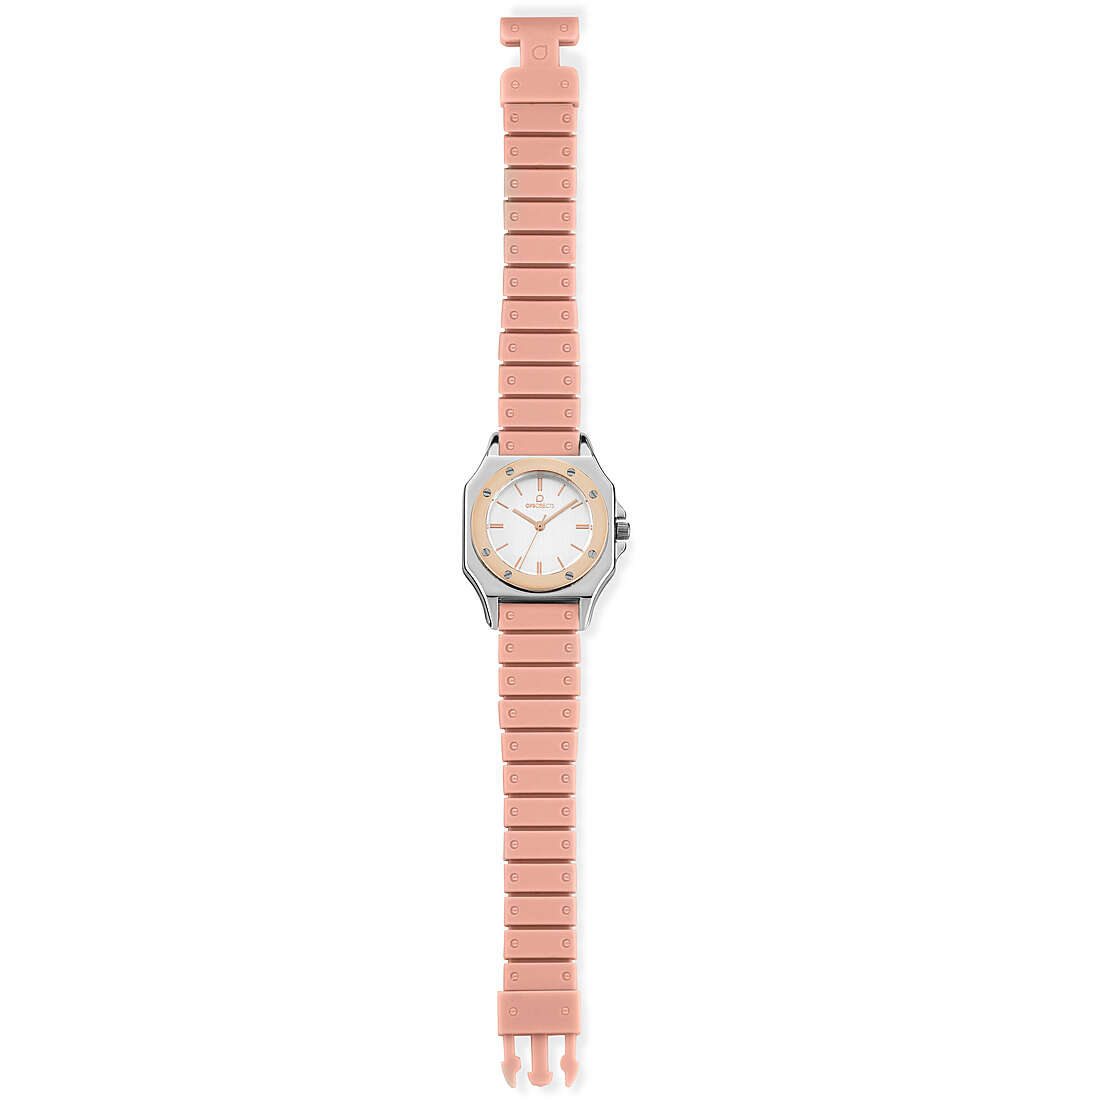 orologio al quarzo Ops Objects donna Paris OPSPW-502